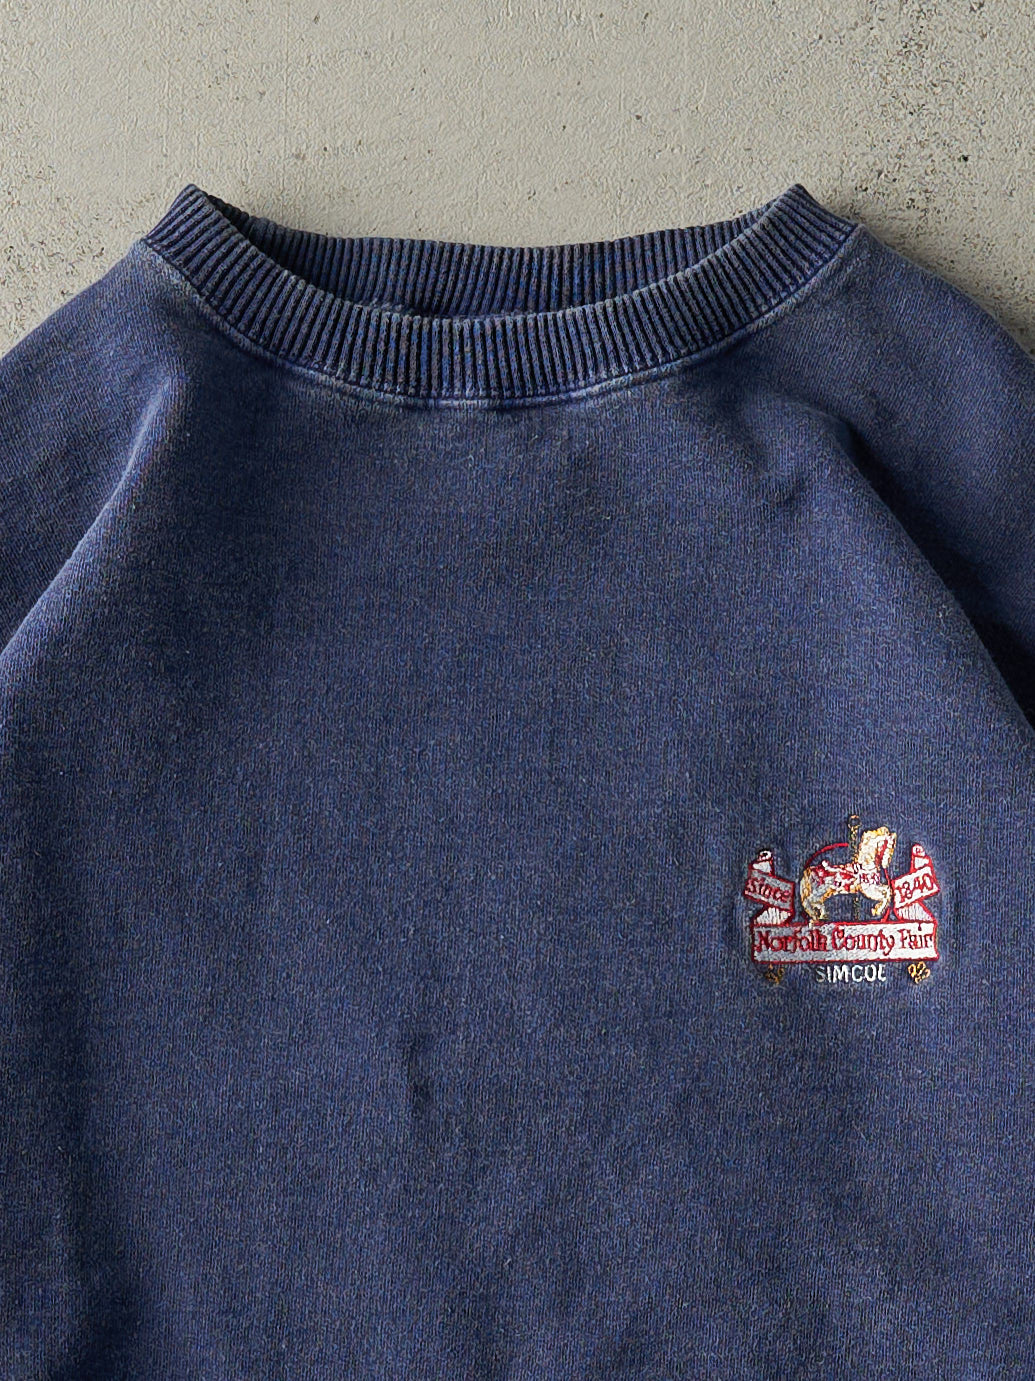 Vintage 90s Washed Navy Blue Embroidered Norfolk County Fair Crewneck (M)